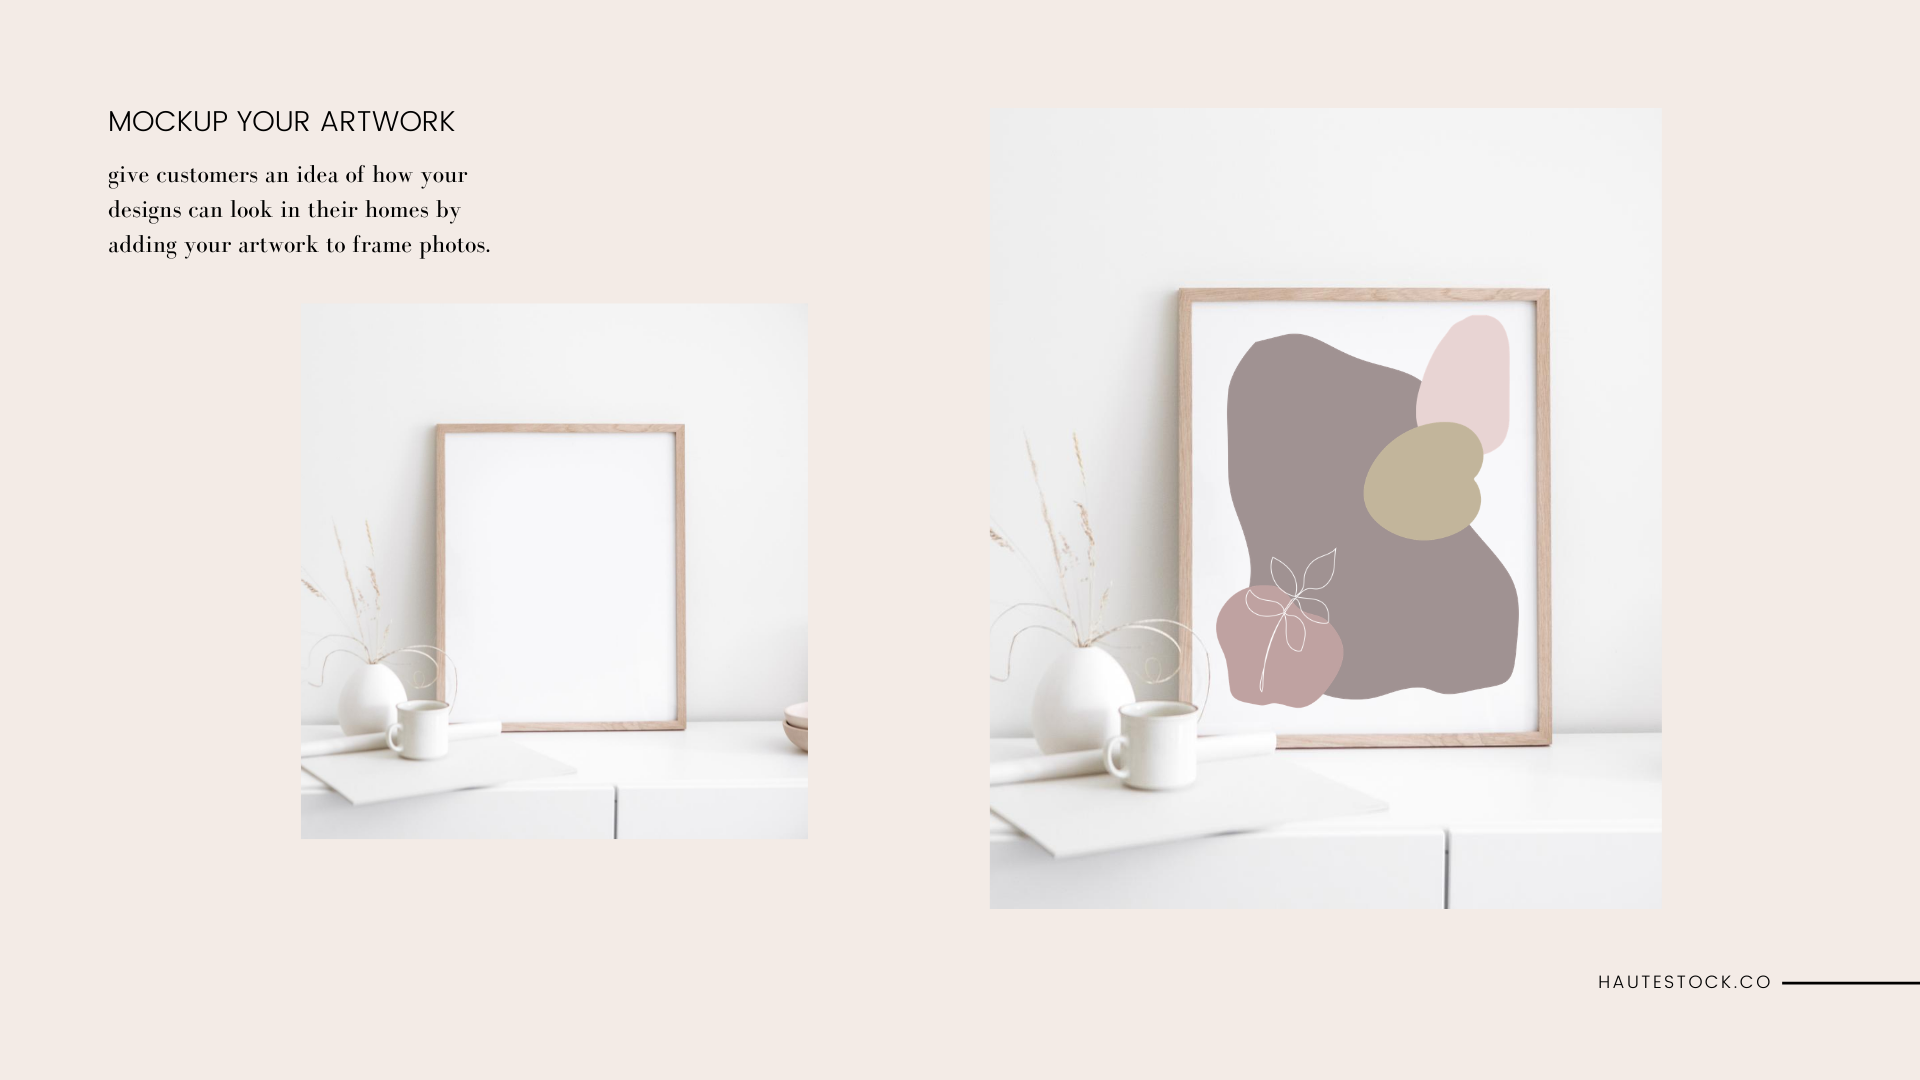 How to add digital designs and prints to mockup frame stock photo images from Haute Stock.